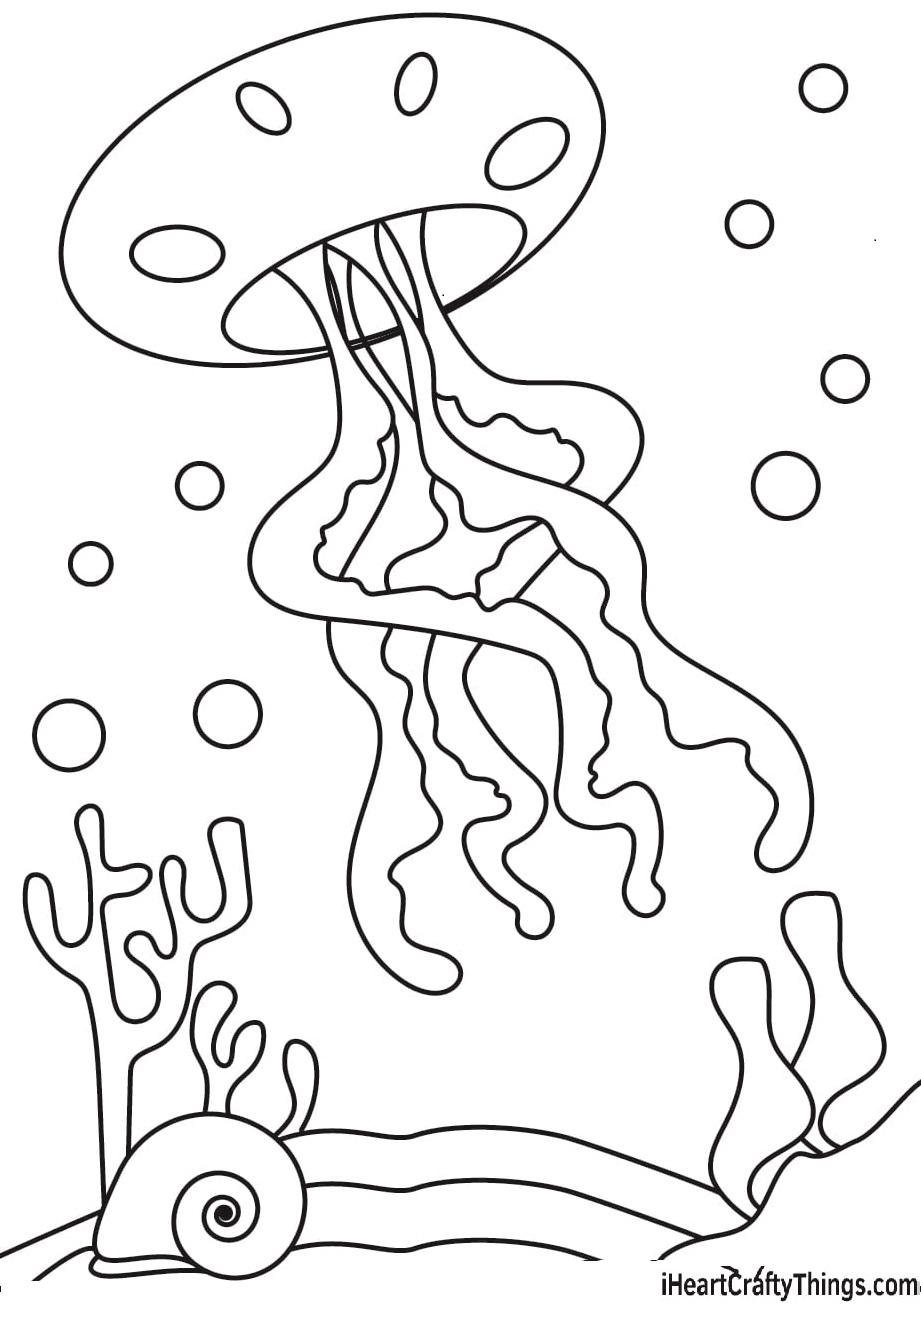 Image Of Box Jellyfish For Kids Coloring Page